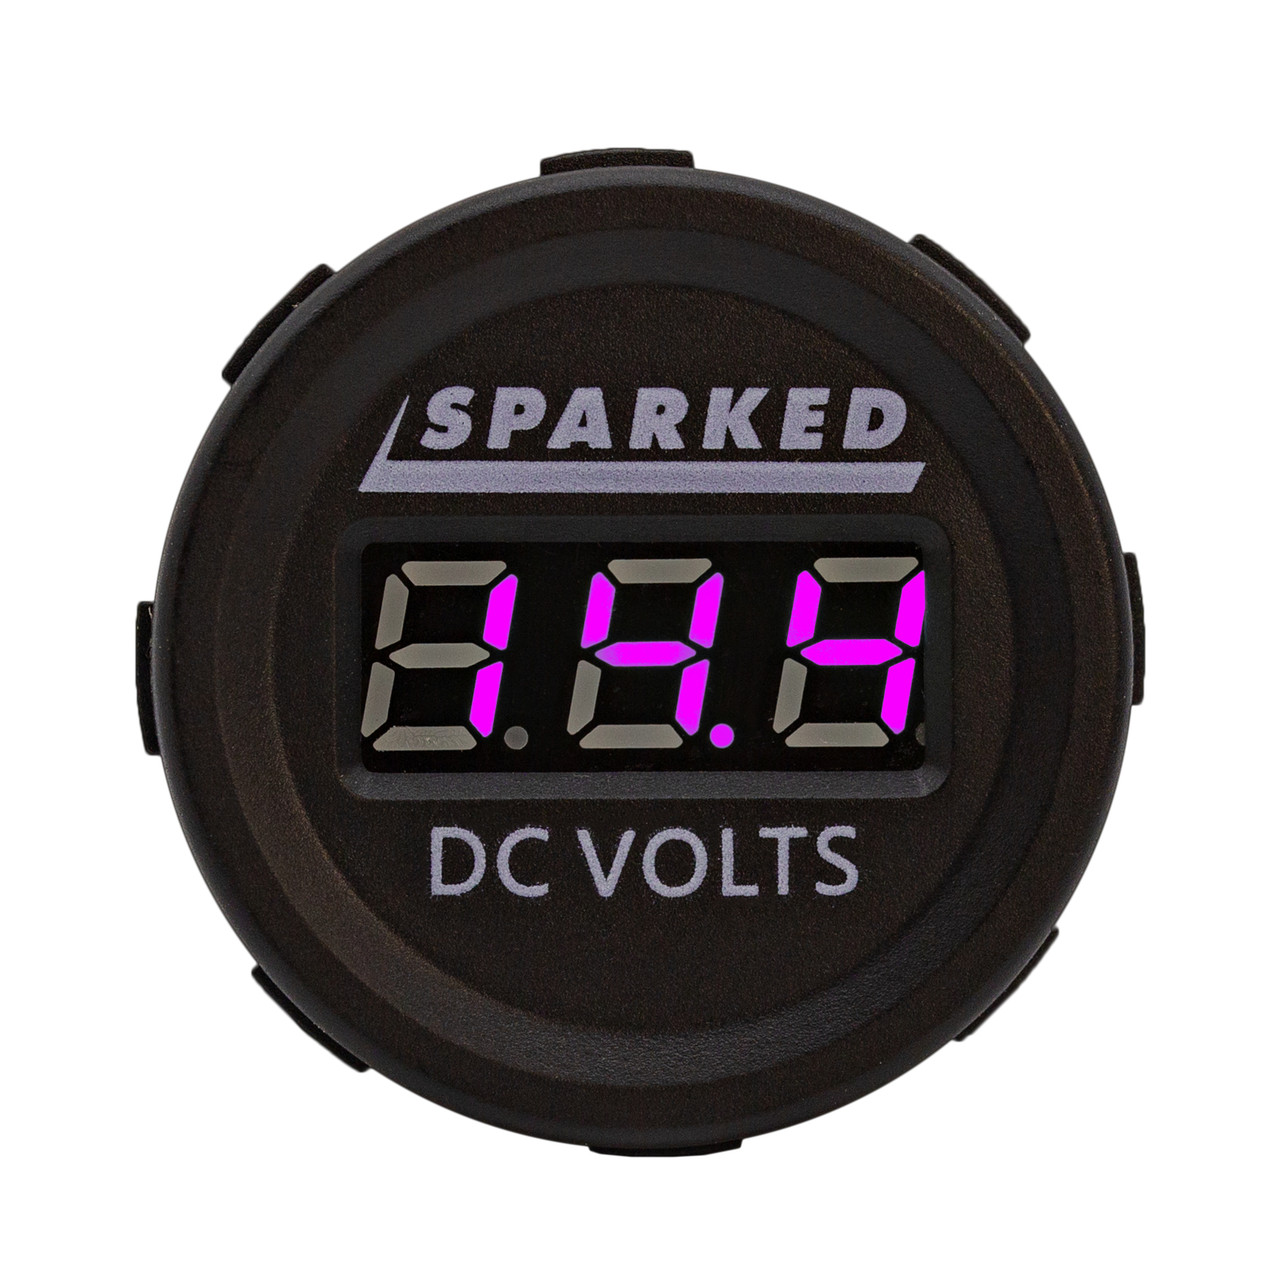 https://cdn11.bigcommerce.com/s-k1hgnxa/images/stencil/1280x1280/products/793/3379/Single-DC-Voltmeter-Purple-Pink-Front-Sparked-DC-VOLTS-2020__27758.1595076459.jpg?c=2